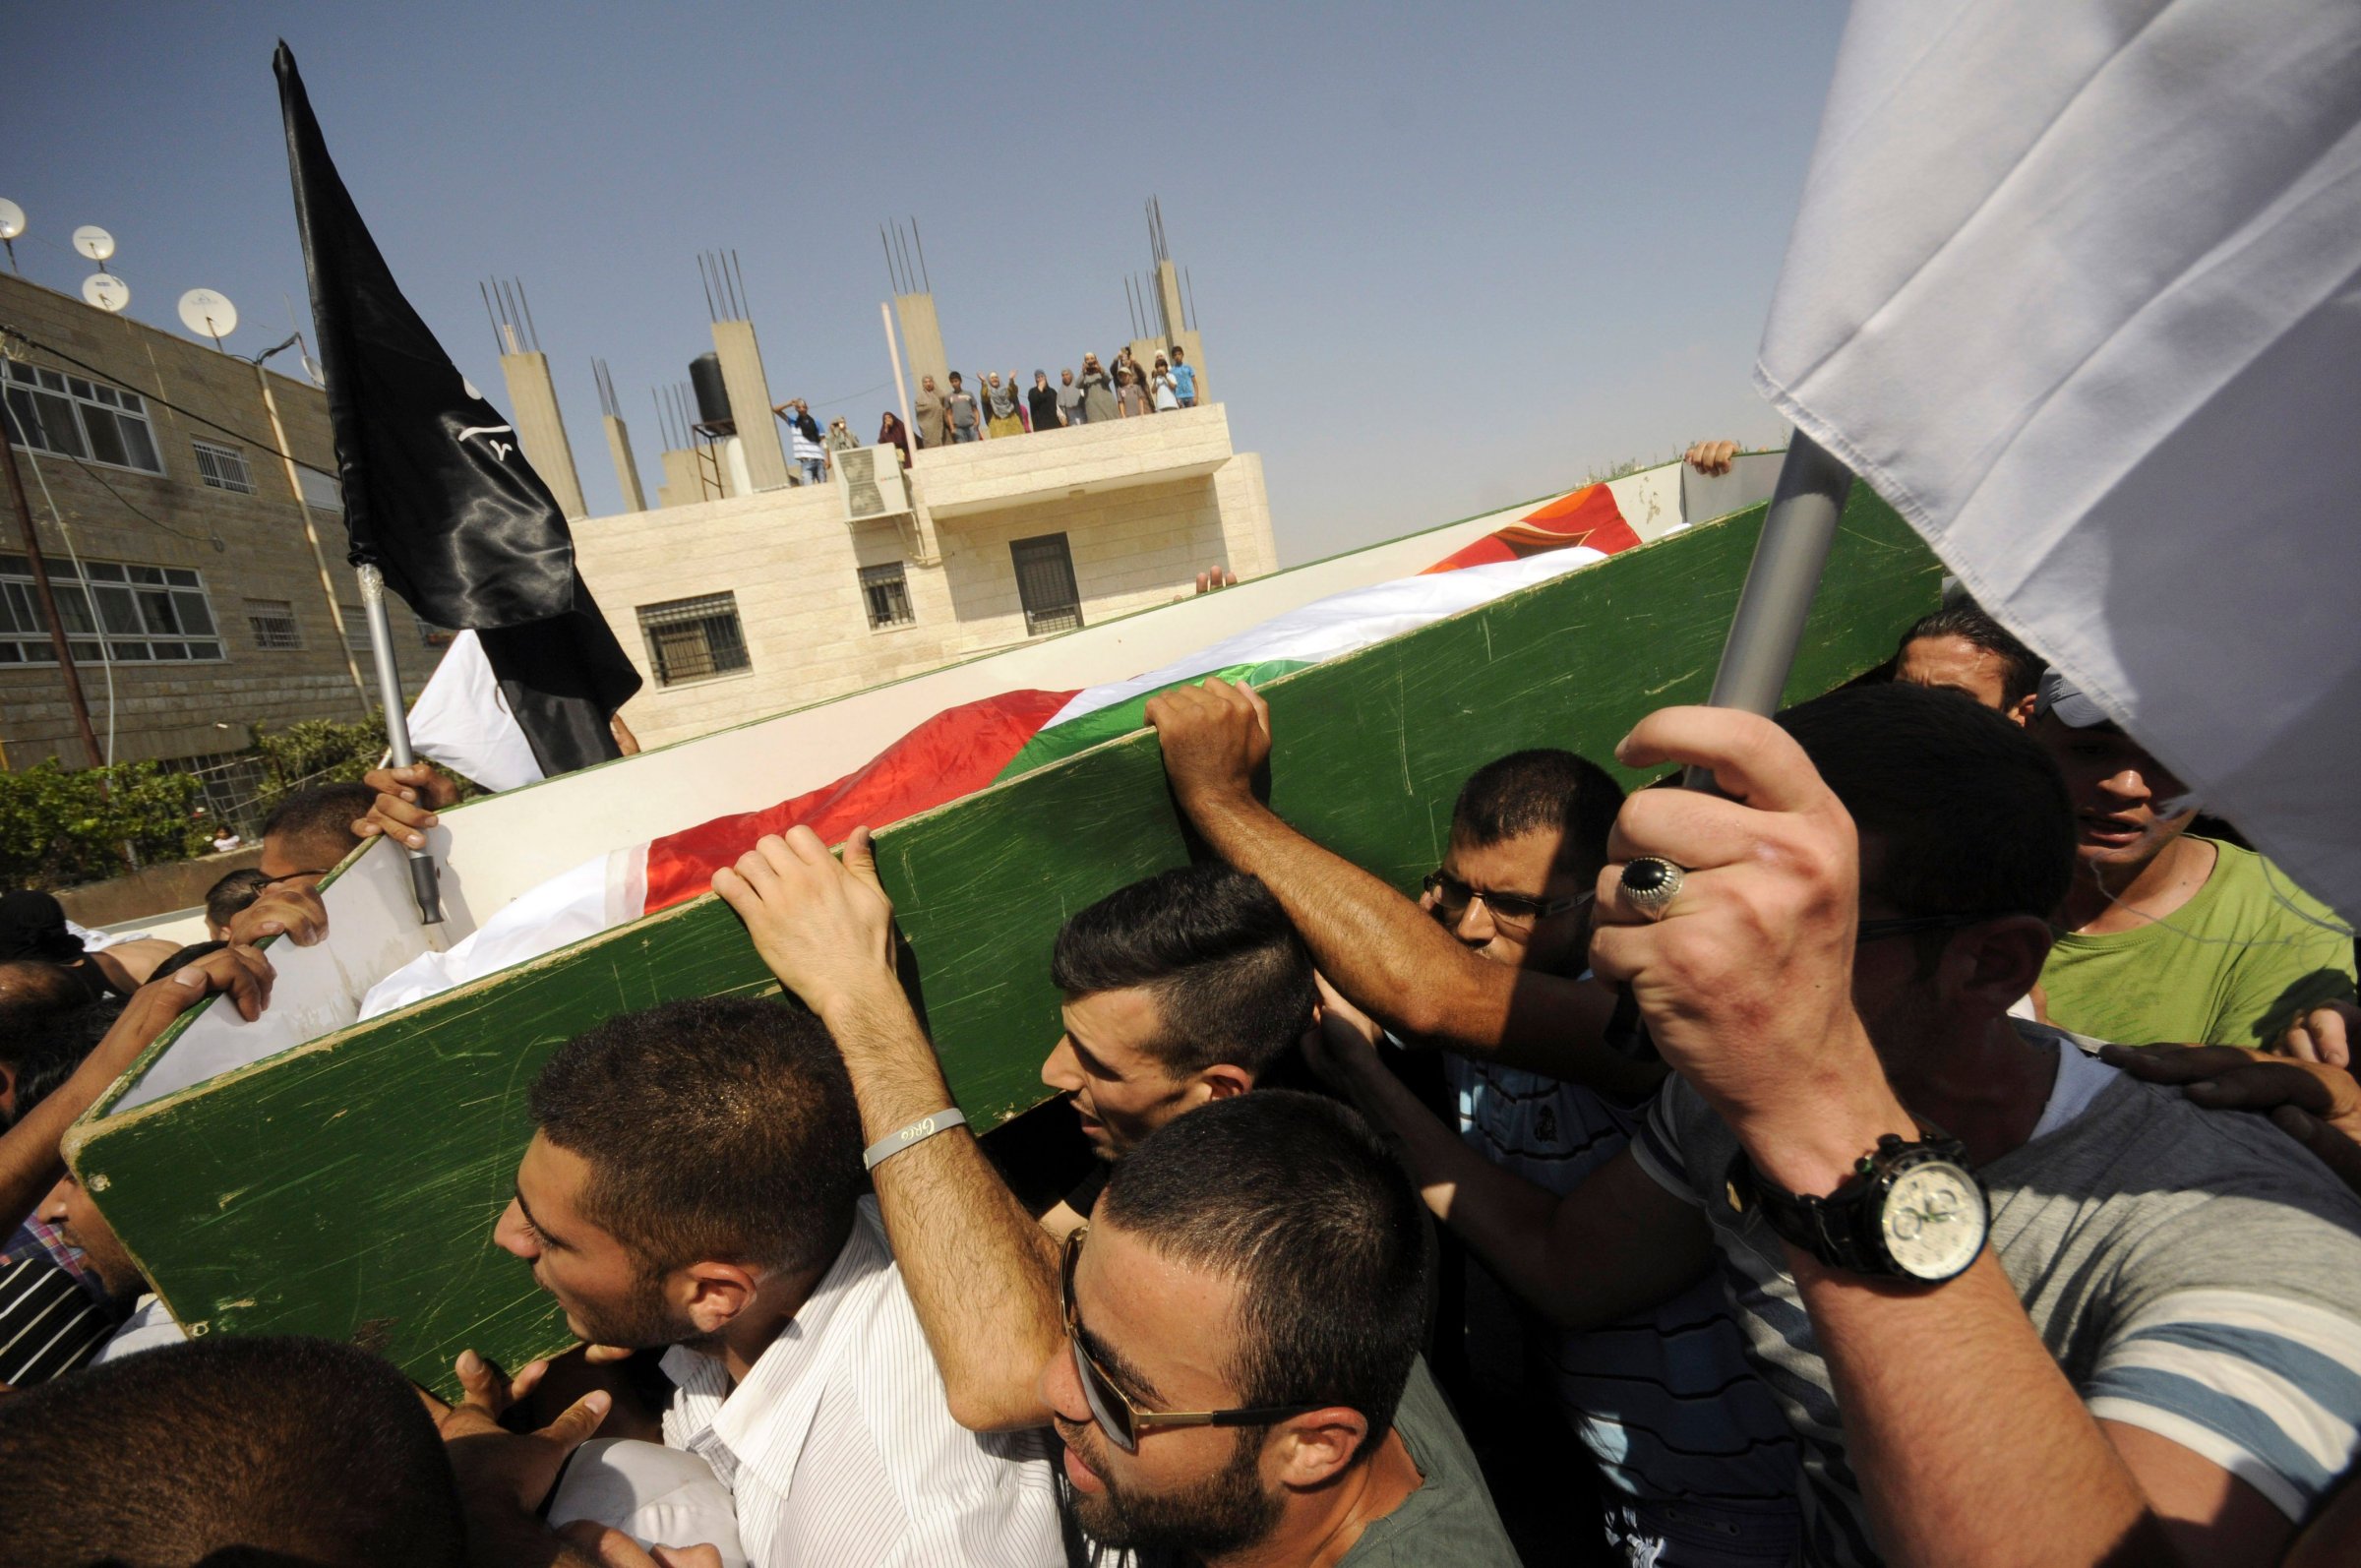 Palestinians carry the body of 16-year-old Mohammed Abu Khdeir in Jerusalem on Friday, July 4, 2014.